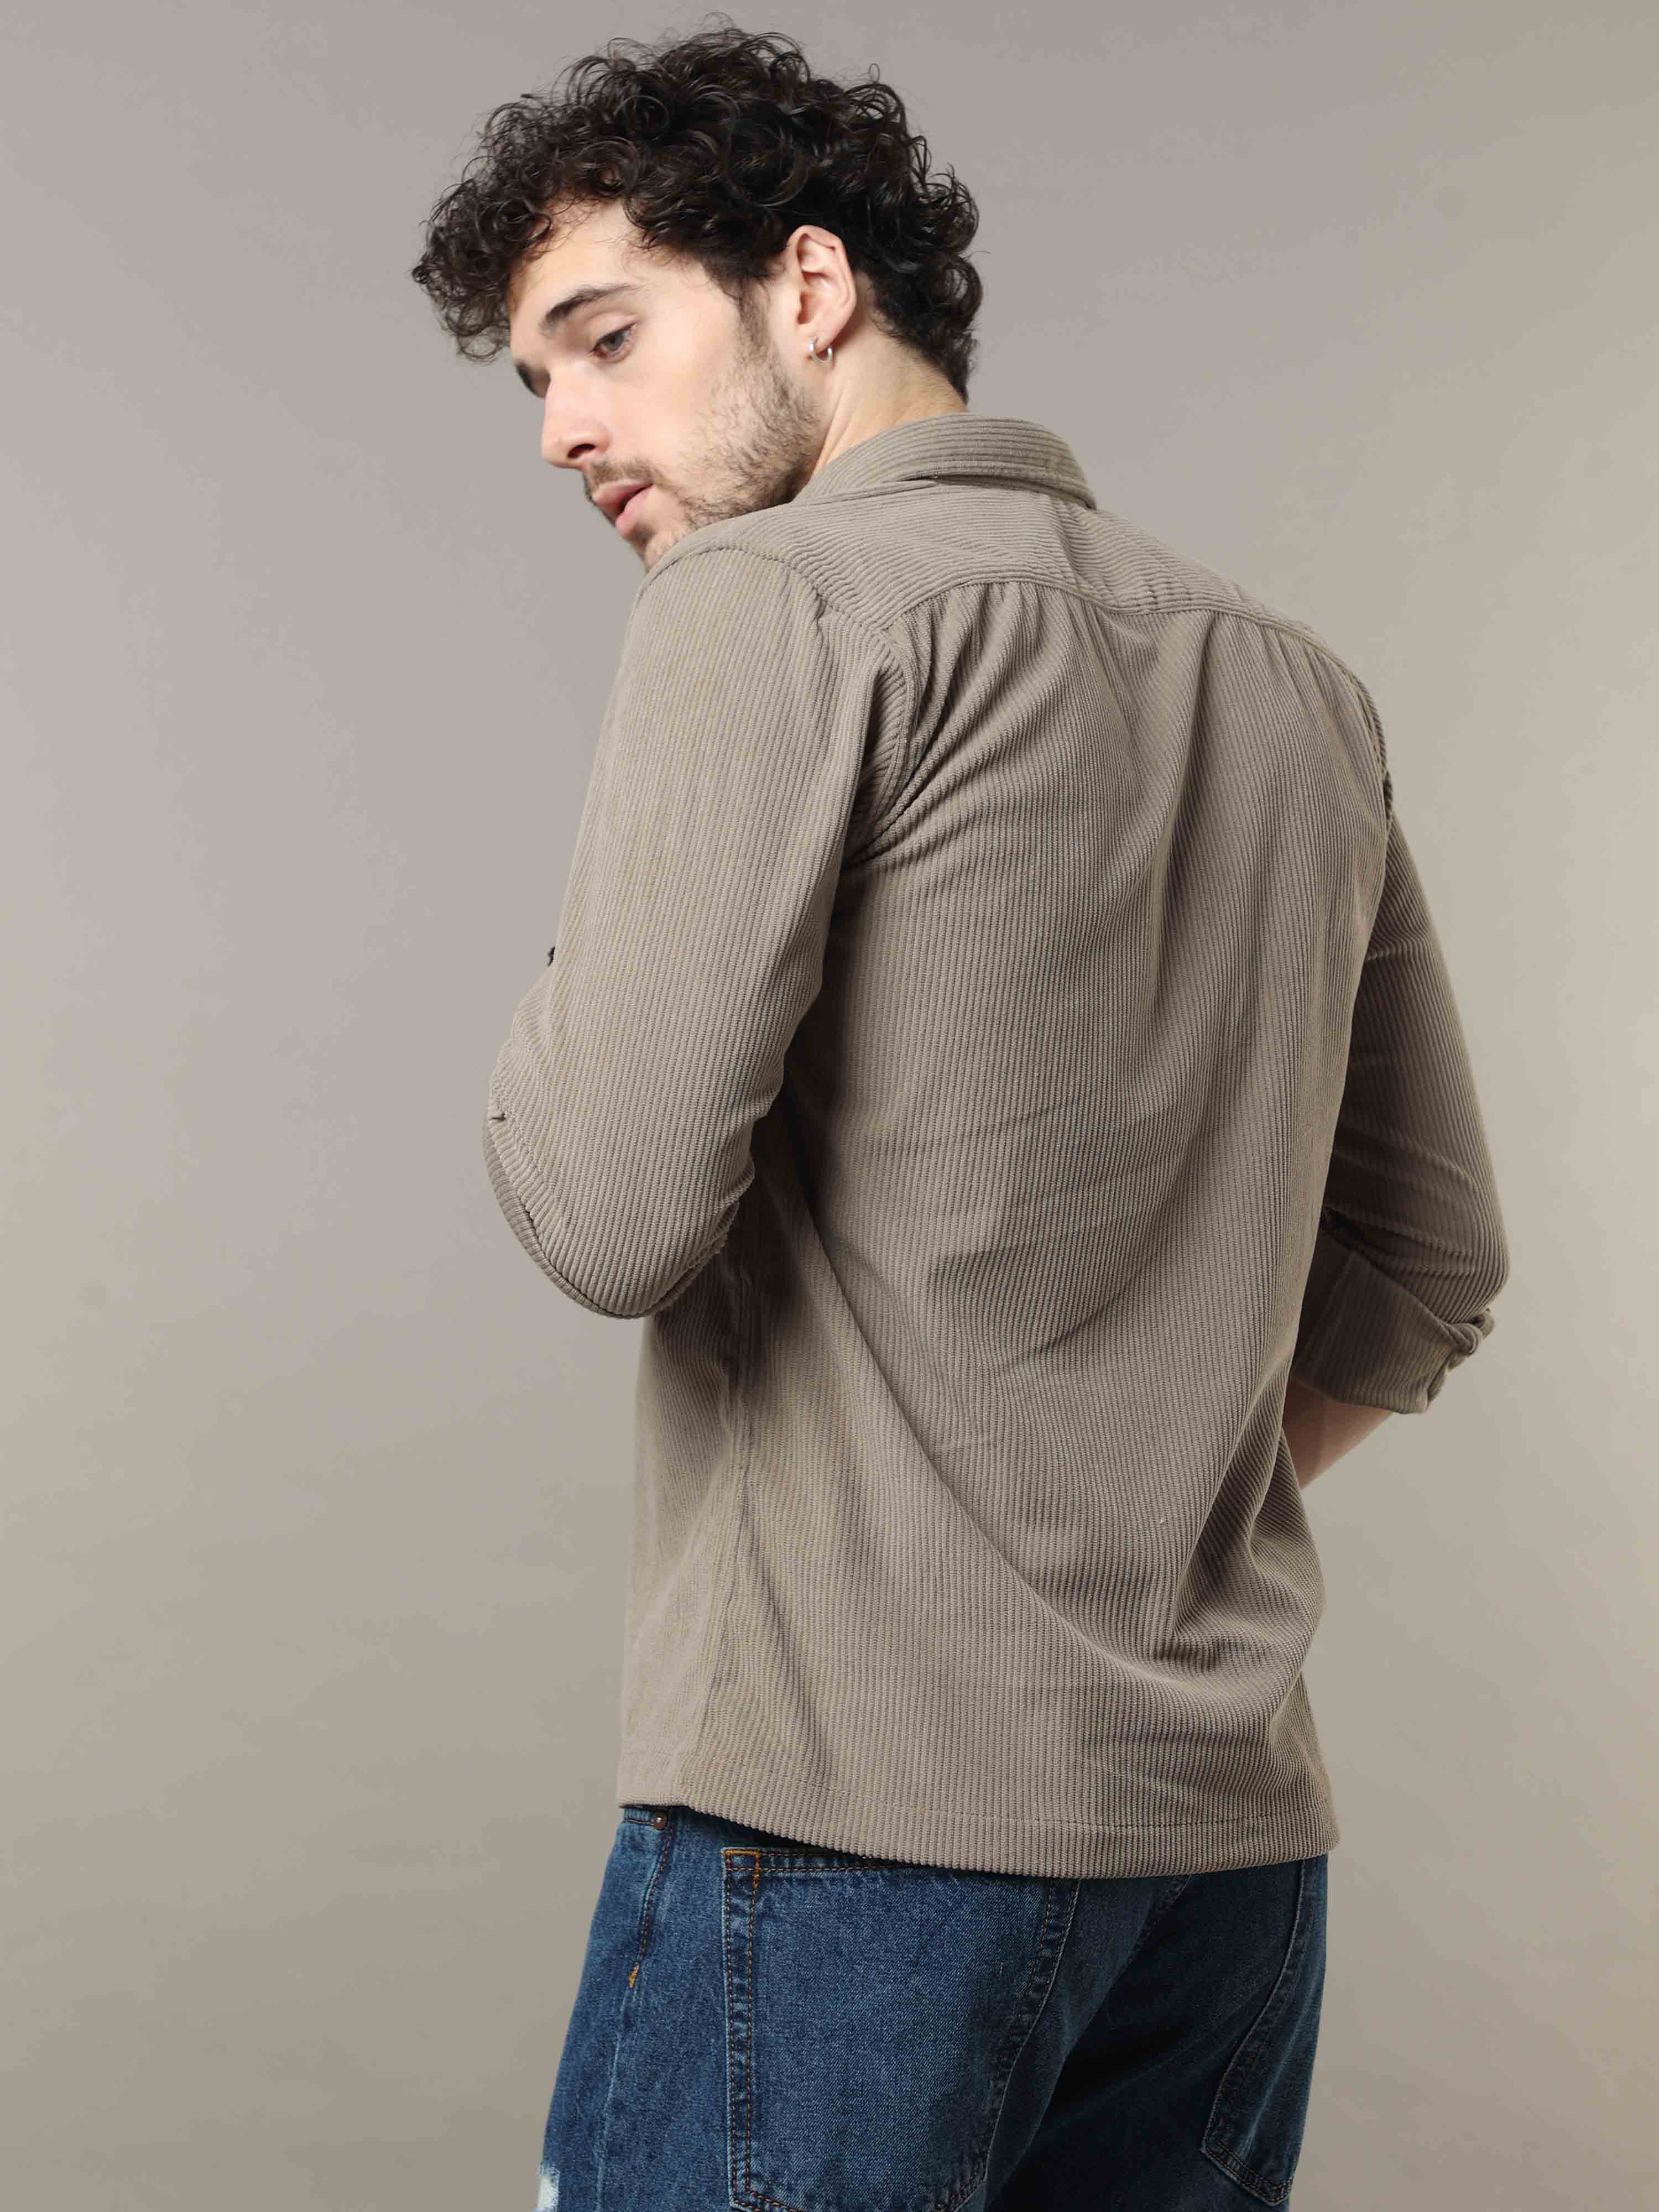 Wood Brown Corduroy Double Pocket with Contrast Patch Shirt